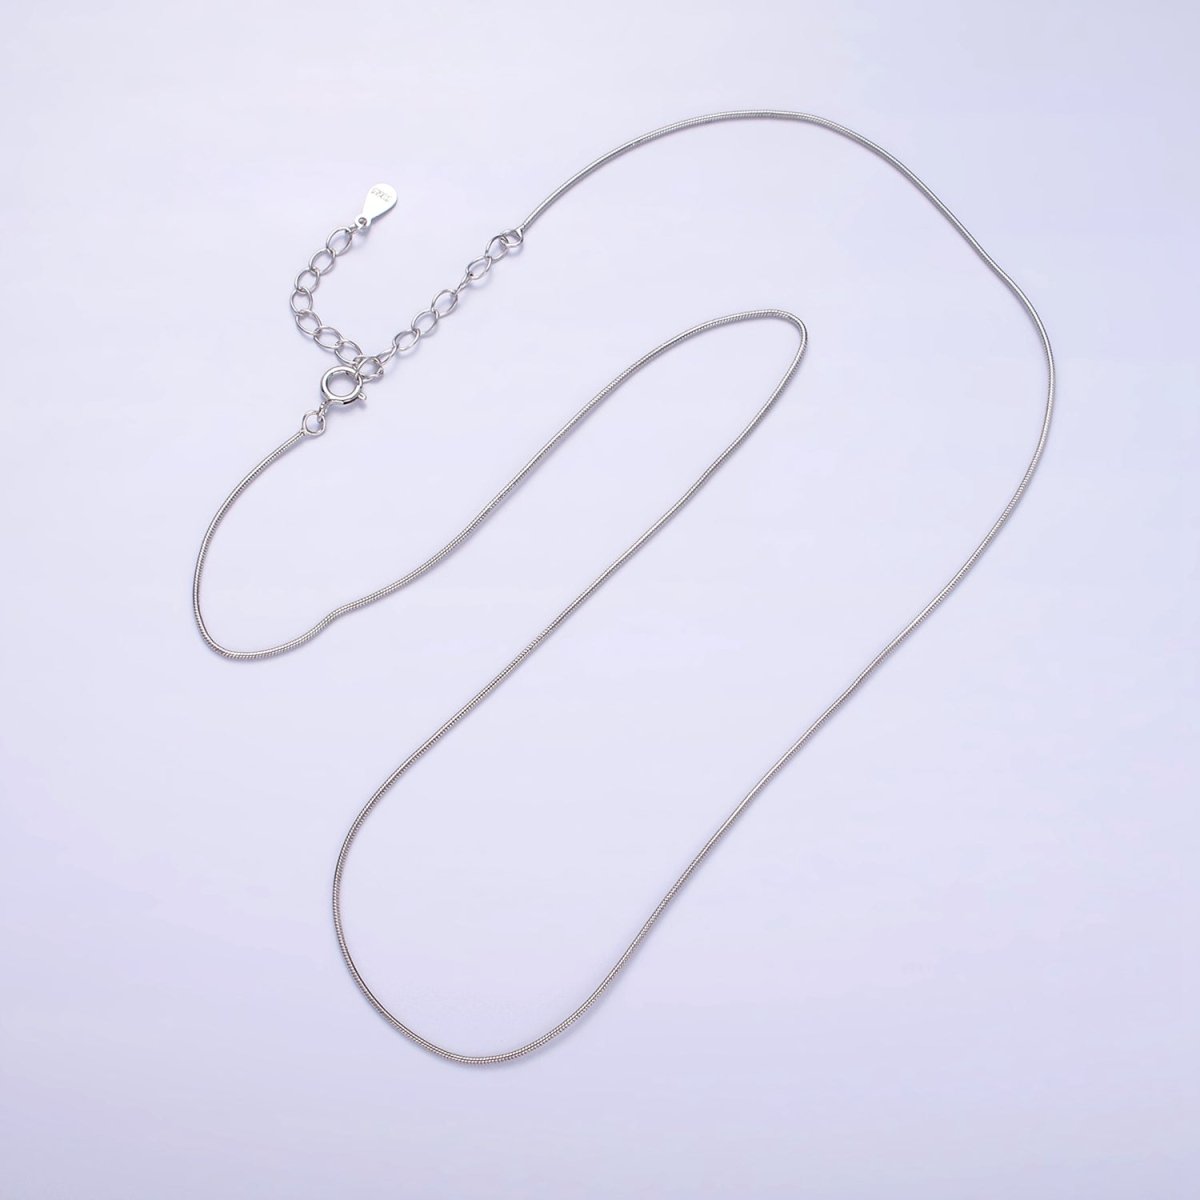 Dainty S925 Sterling Silver 0.7mm Snake Cocoon Chain 16 Inch + 2 inch Extender Chain Necklace | WA-2160 Clearance Pricing - DLUXCA